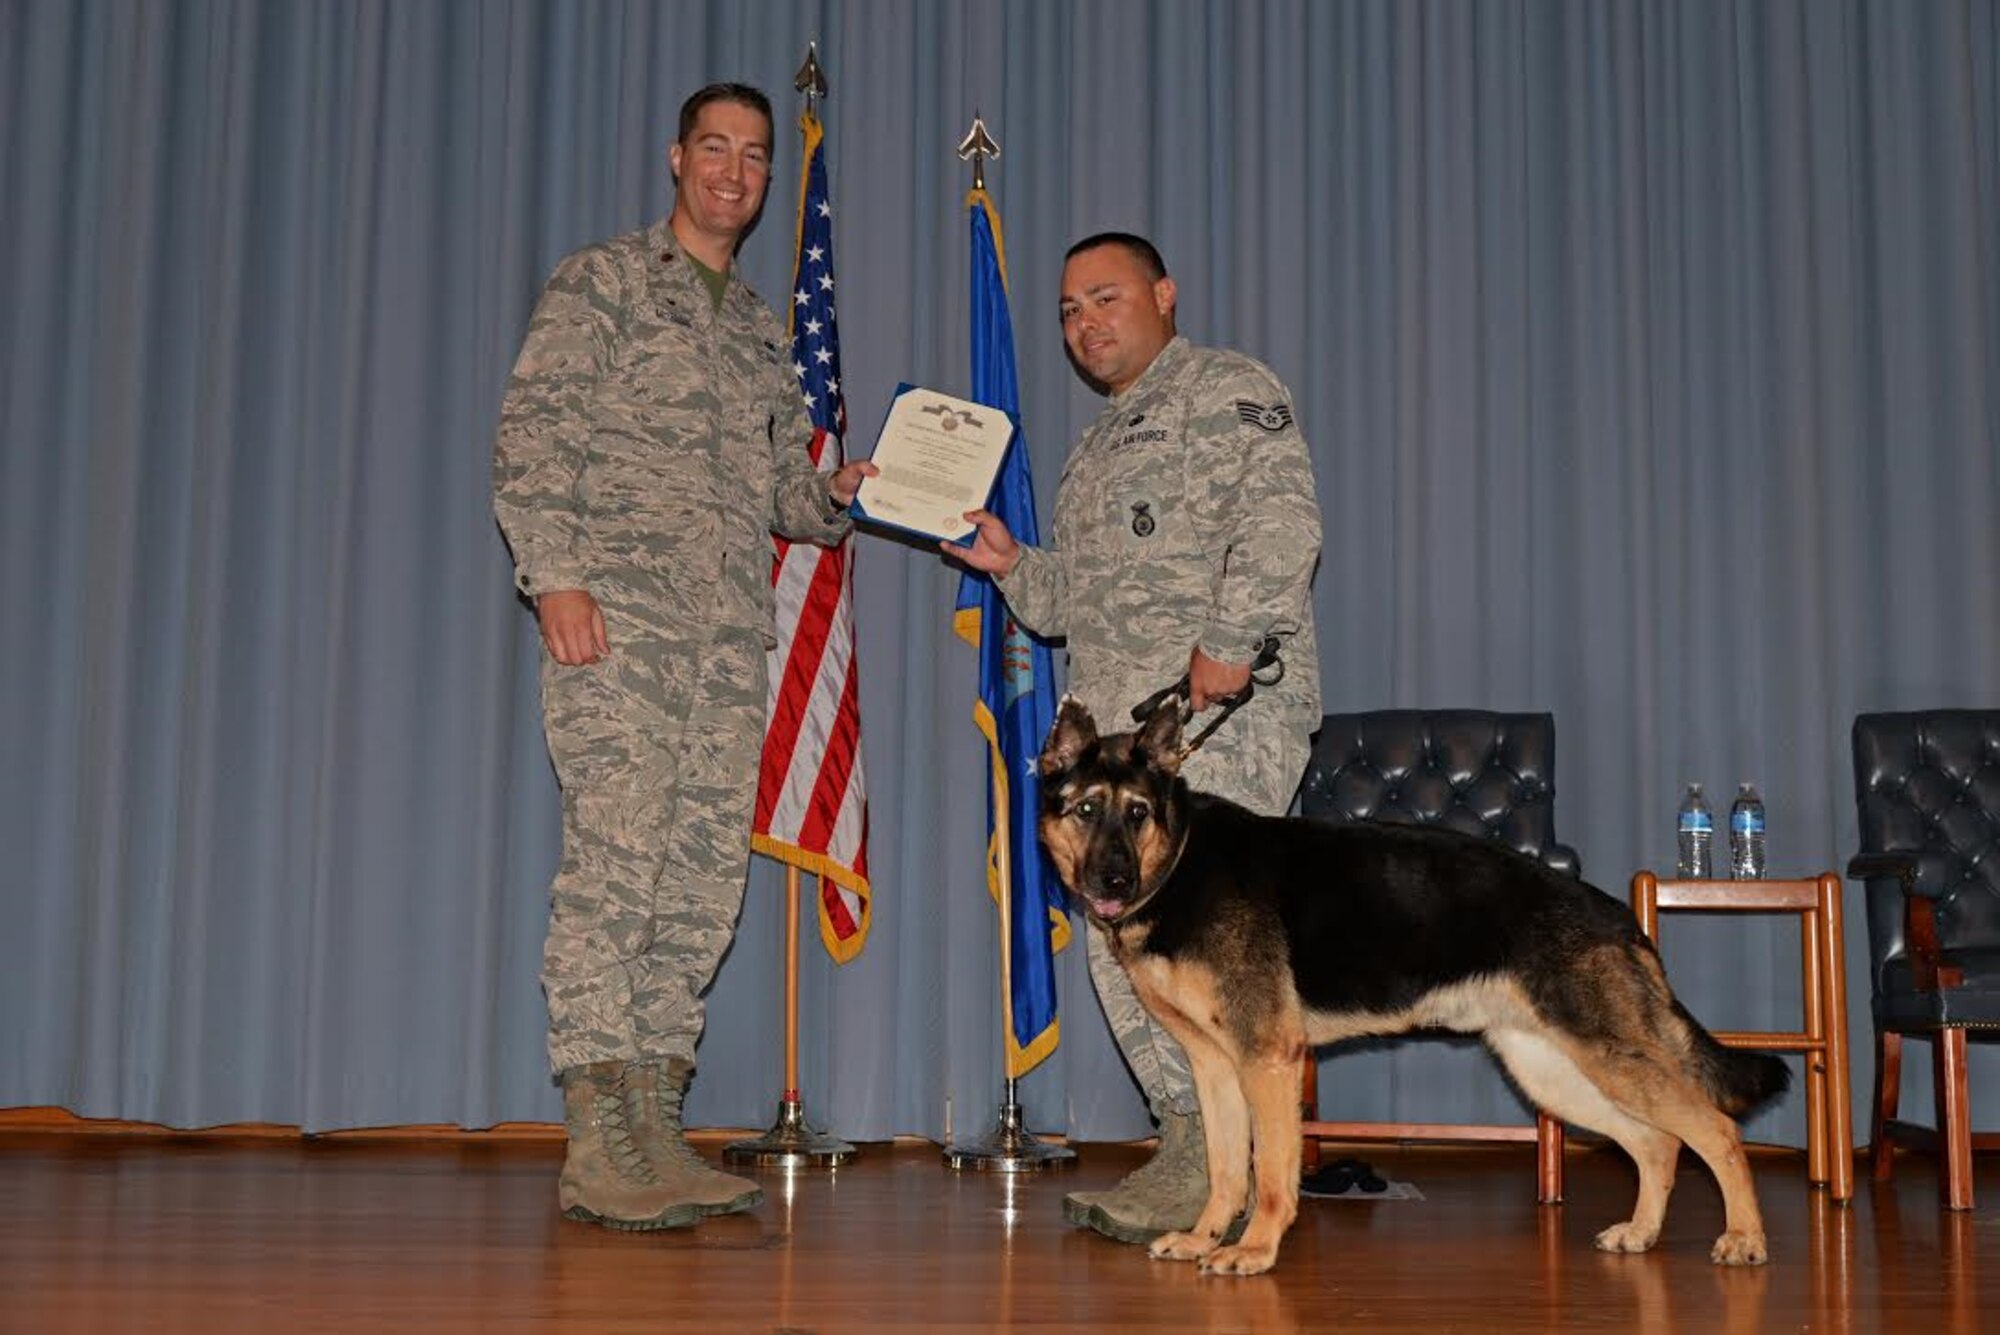 U.S. Air Force Maj. Matthew McGinnis, 47th Security Forces Squadron commander, presents an award to Staff Sgt. Cody Davidson, 47th Military Working Dogs patrolman, and his K-9 dog Foxo, during a retirement ceremony for Foxo at Laughlin Air Force base, Texas on August 25, 2017.